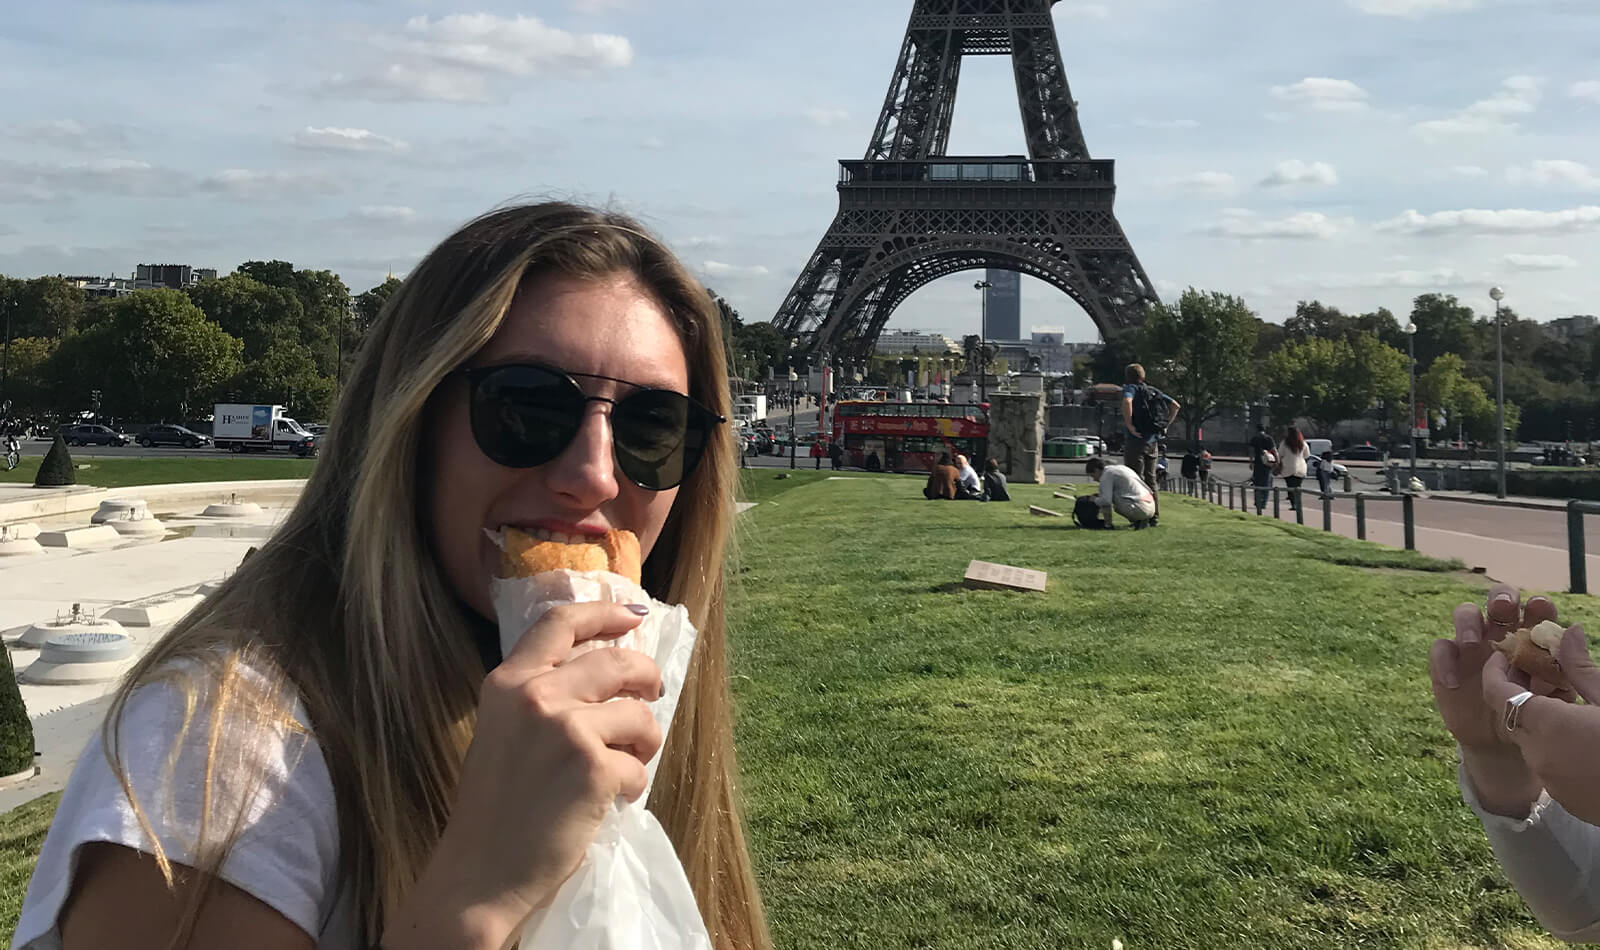 On the lawn in front of the Eiffel Tower in Paris, Ryann enjoys an authentic Parisian sandwich. 